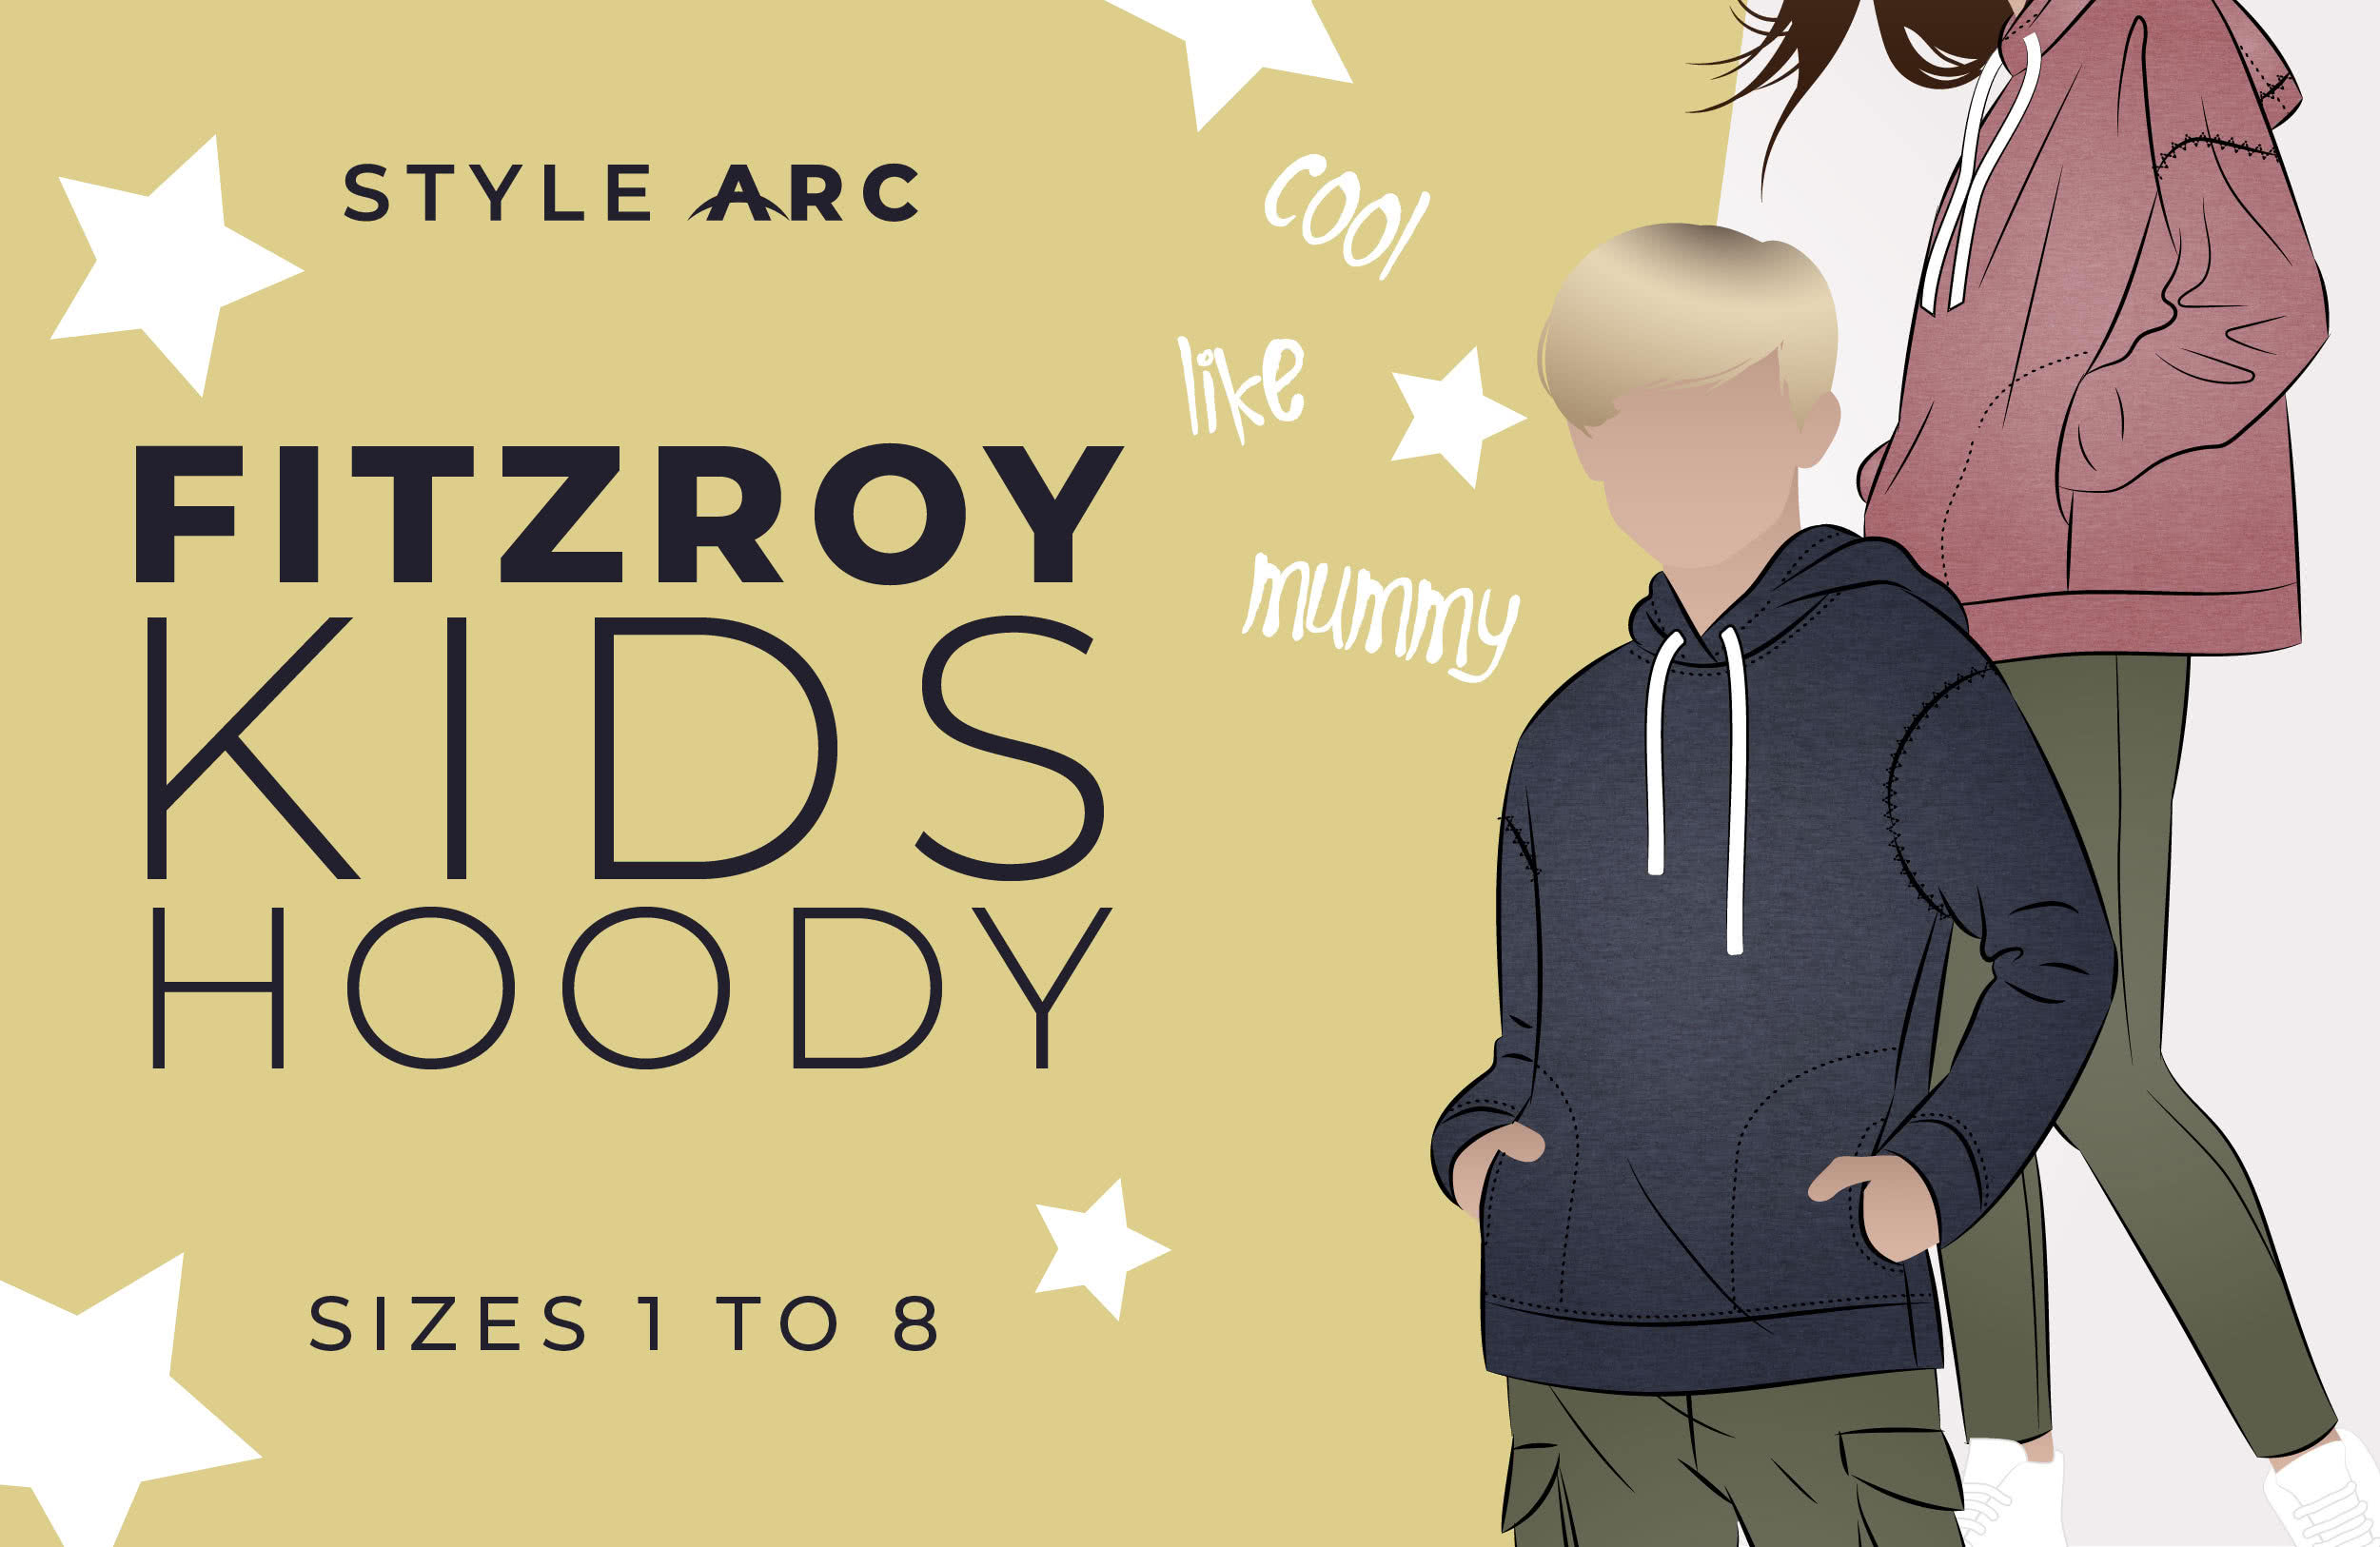 Fitzroy Kids Hoody - Available in sizes 1-8